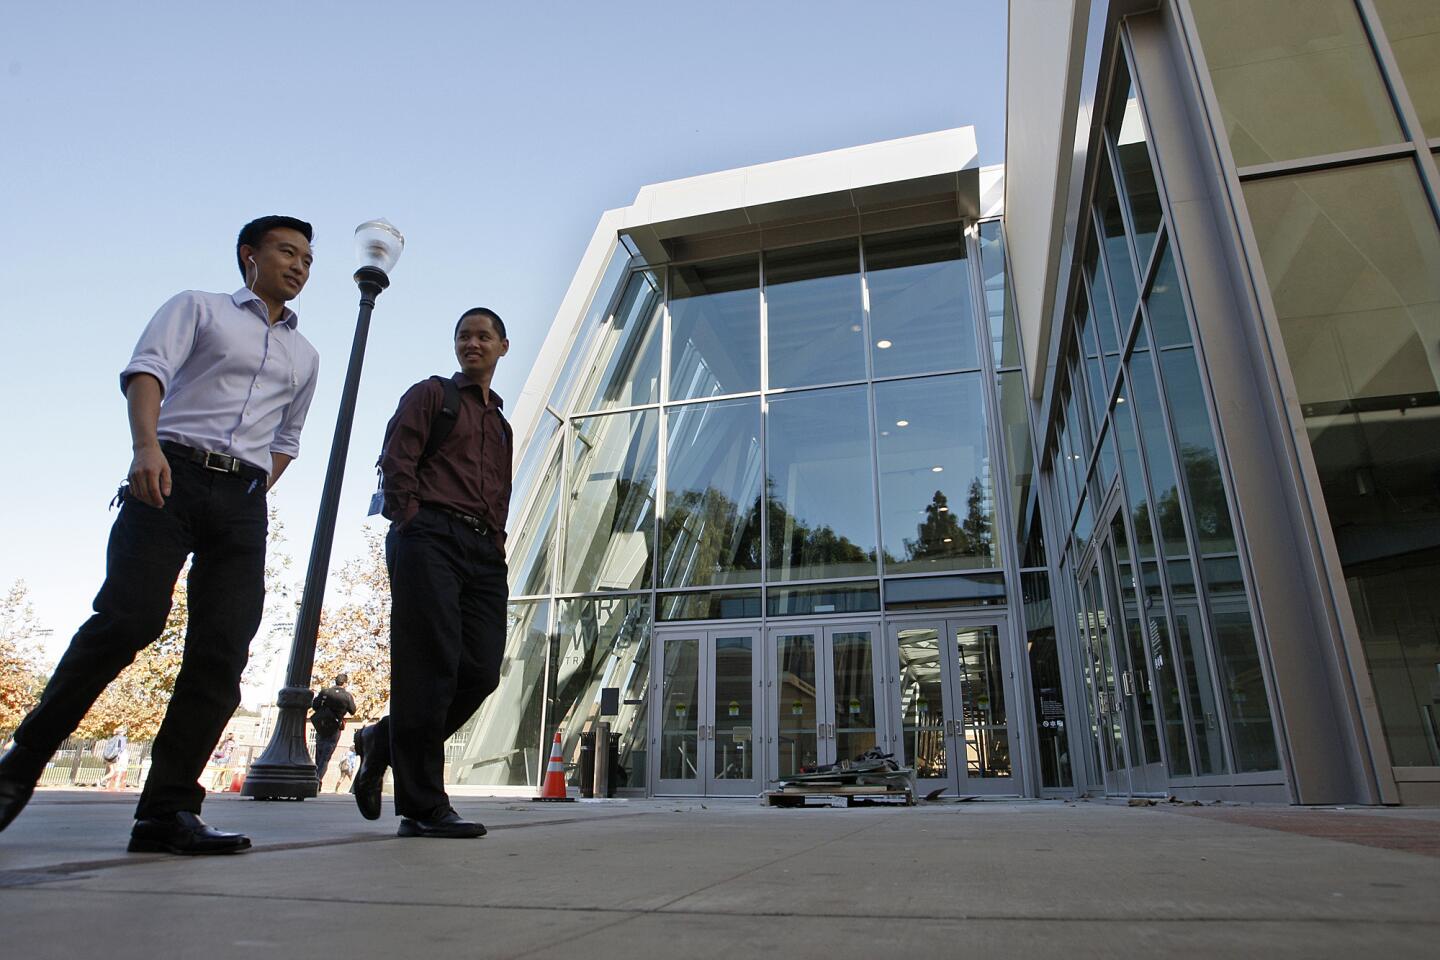 Students walk past an entrance to the freshly renovated Pauley Pavilion on the UCLA campus.